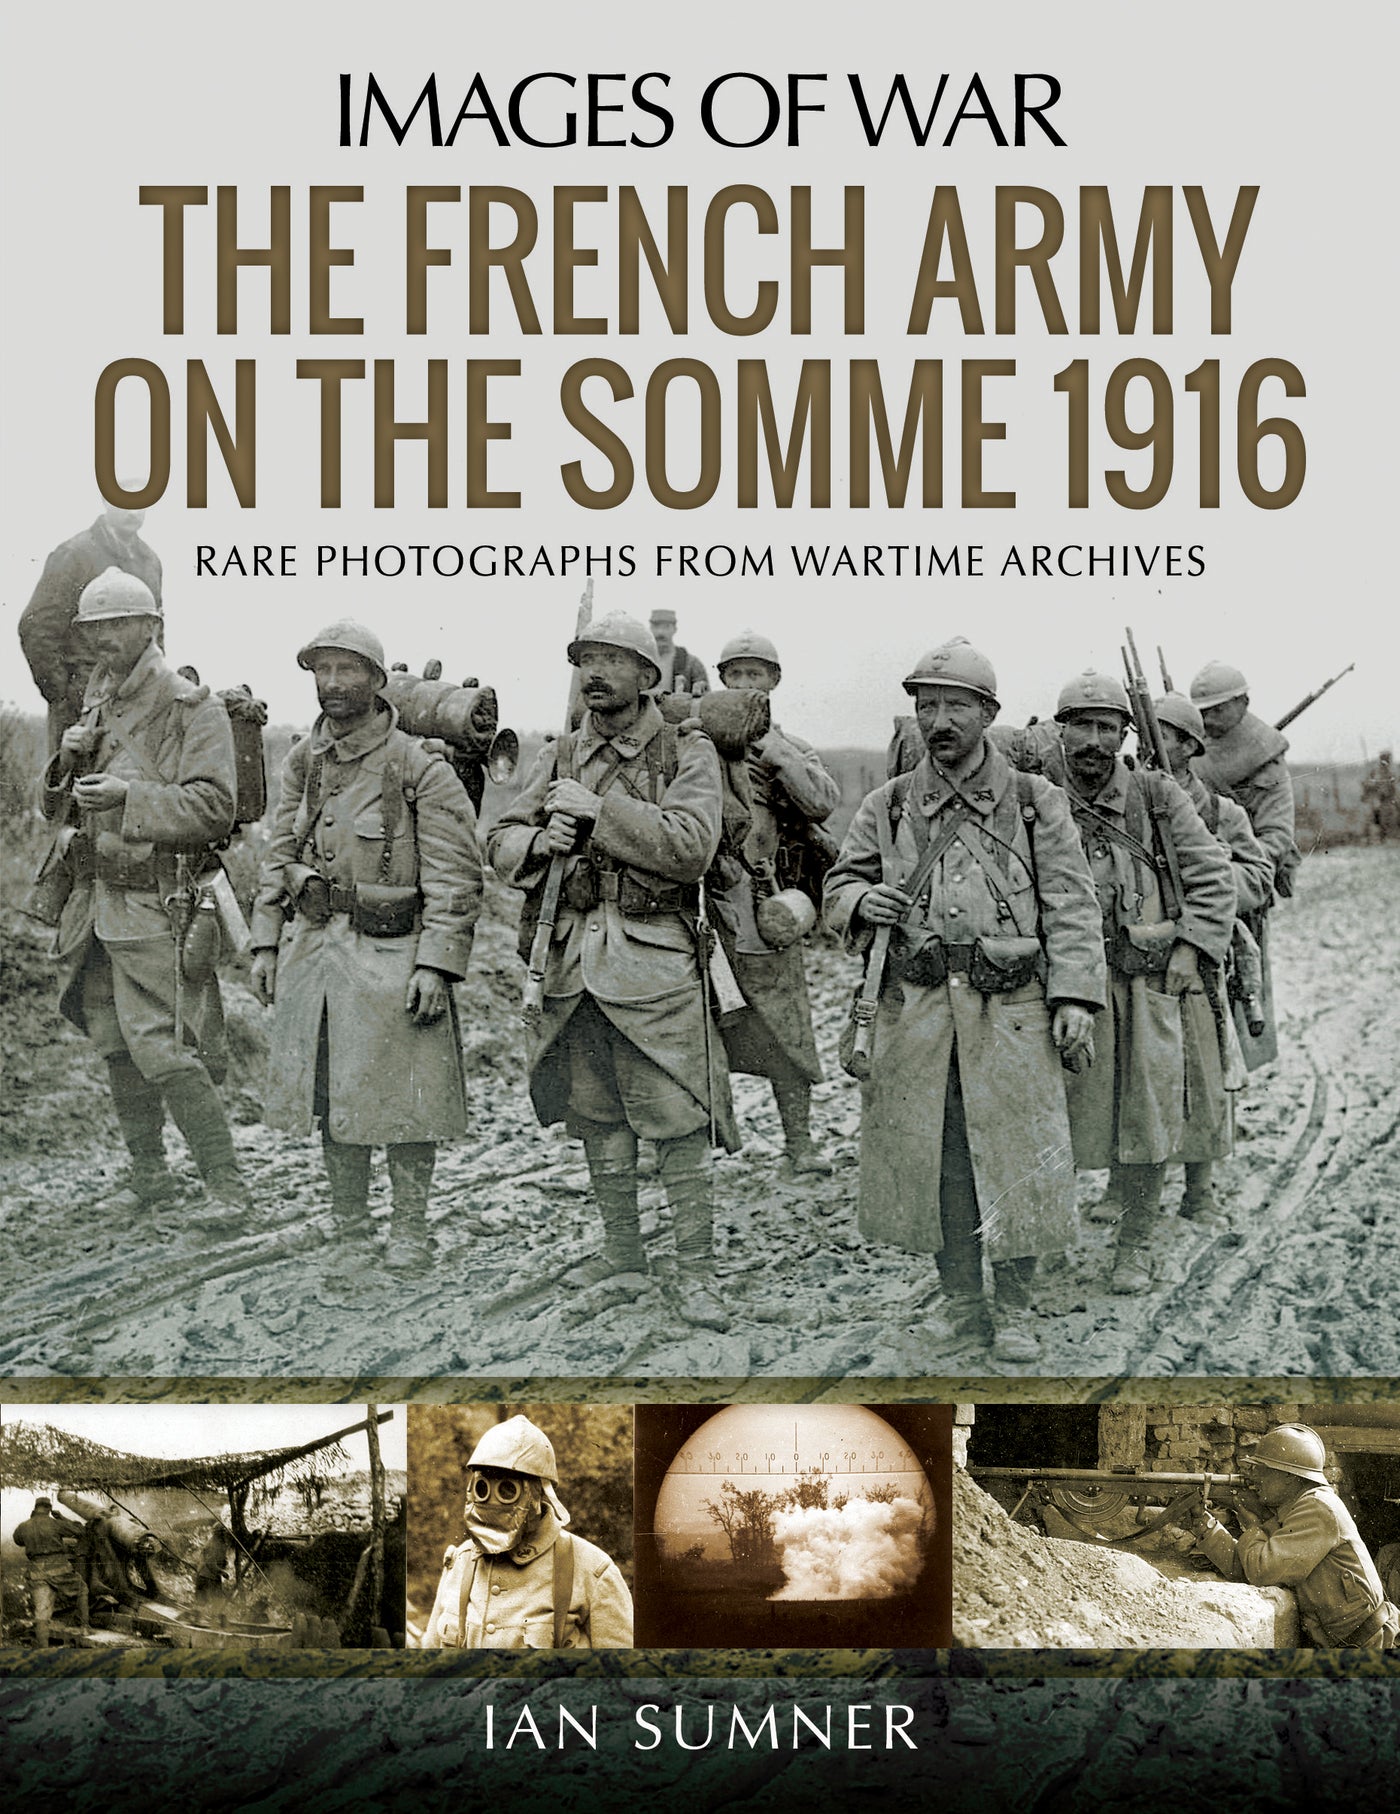 The French Army on the Somme 1916